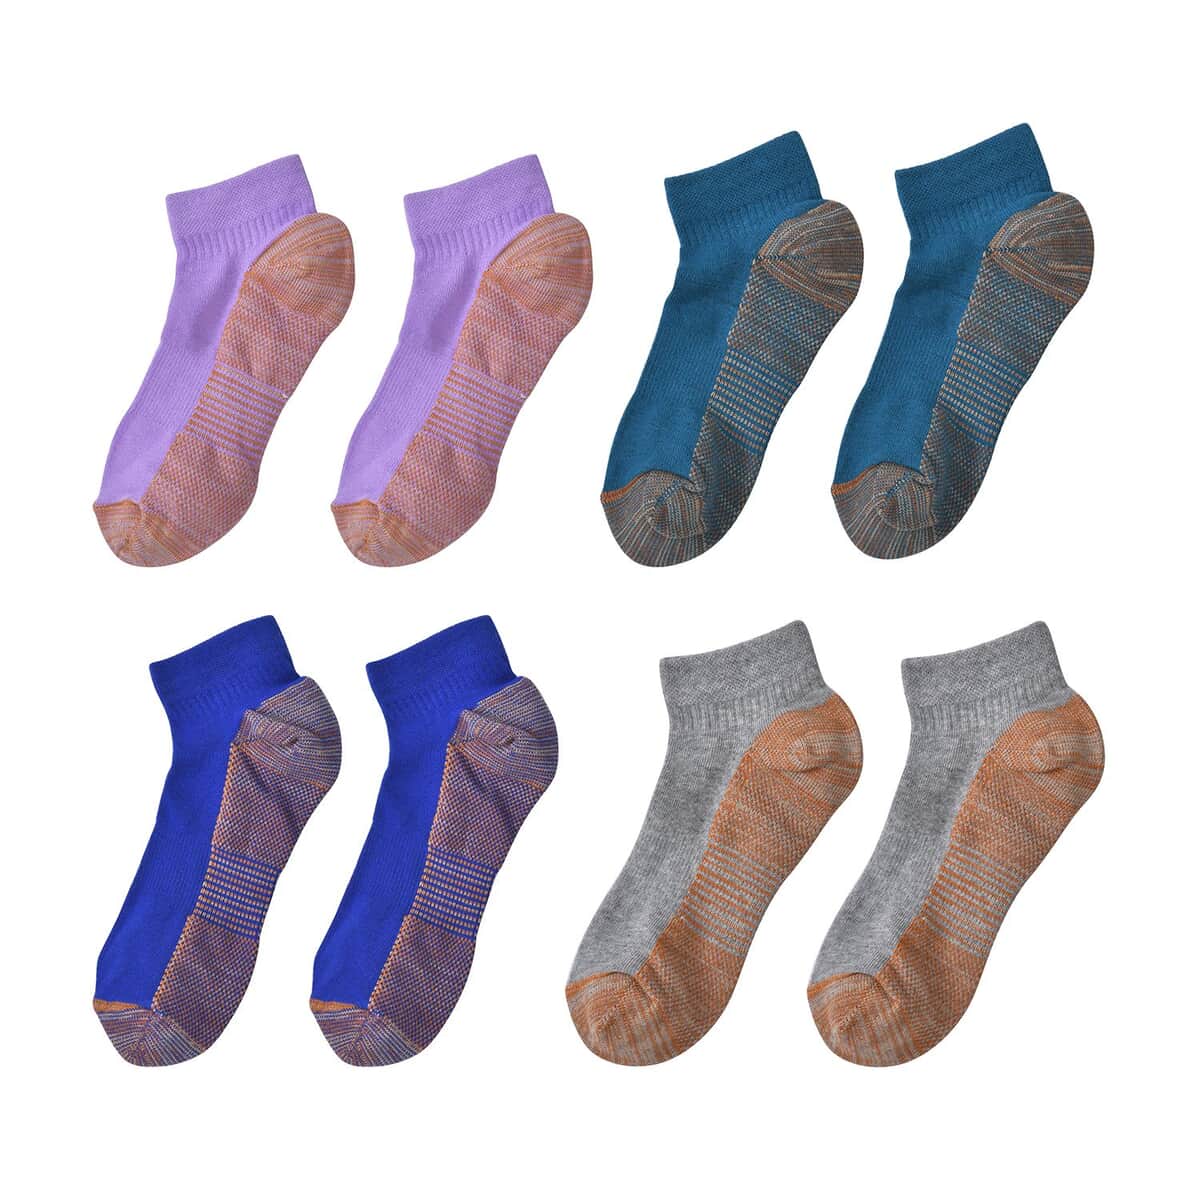 Set of 4 Pairs of Ankle Length Odor Free Copper Compression Socks For Men And Women, Premium Material Moisture Wicking Unisex Copper Infused Socks - Purple, Green, Navy & Gray (L/XL) image number 0